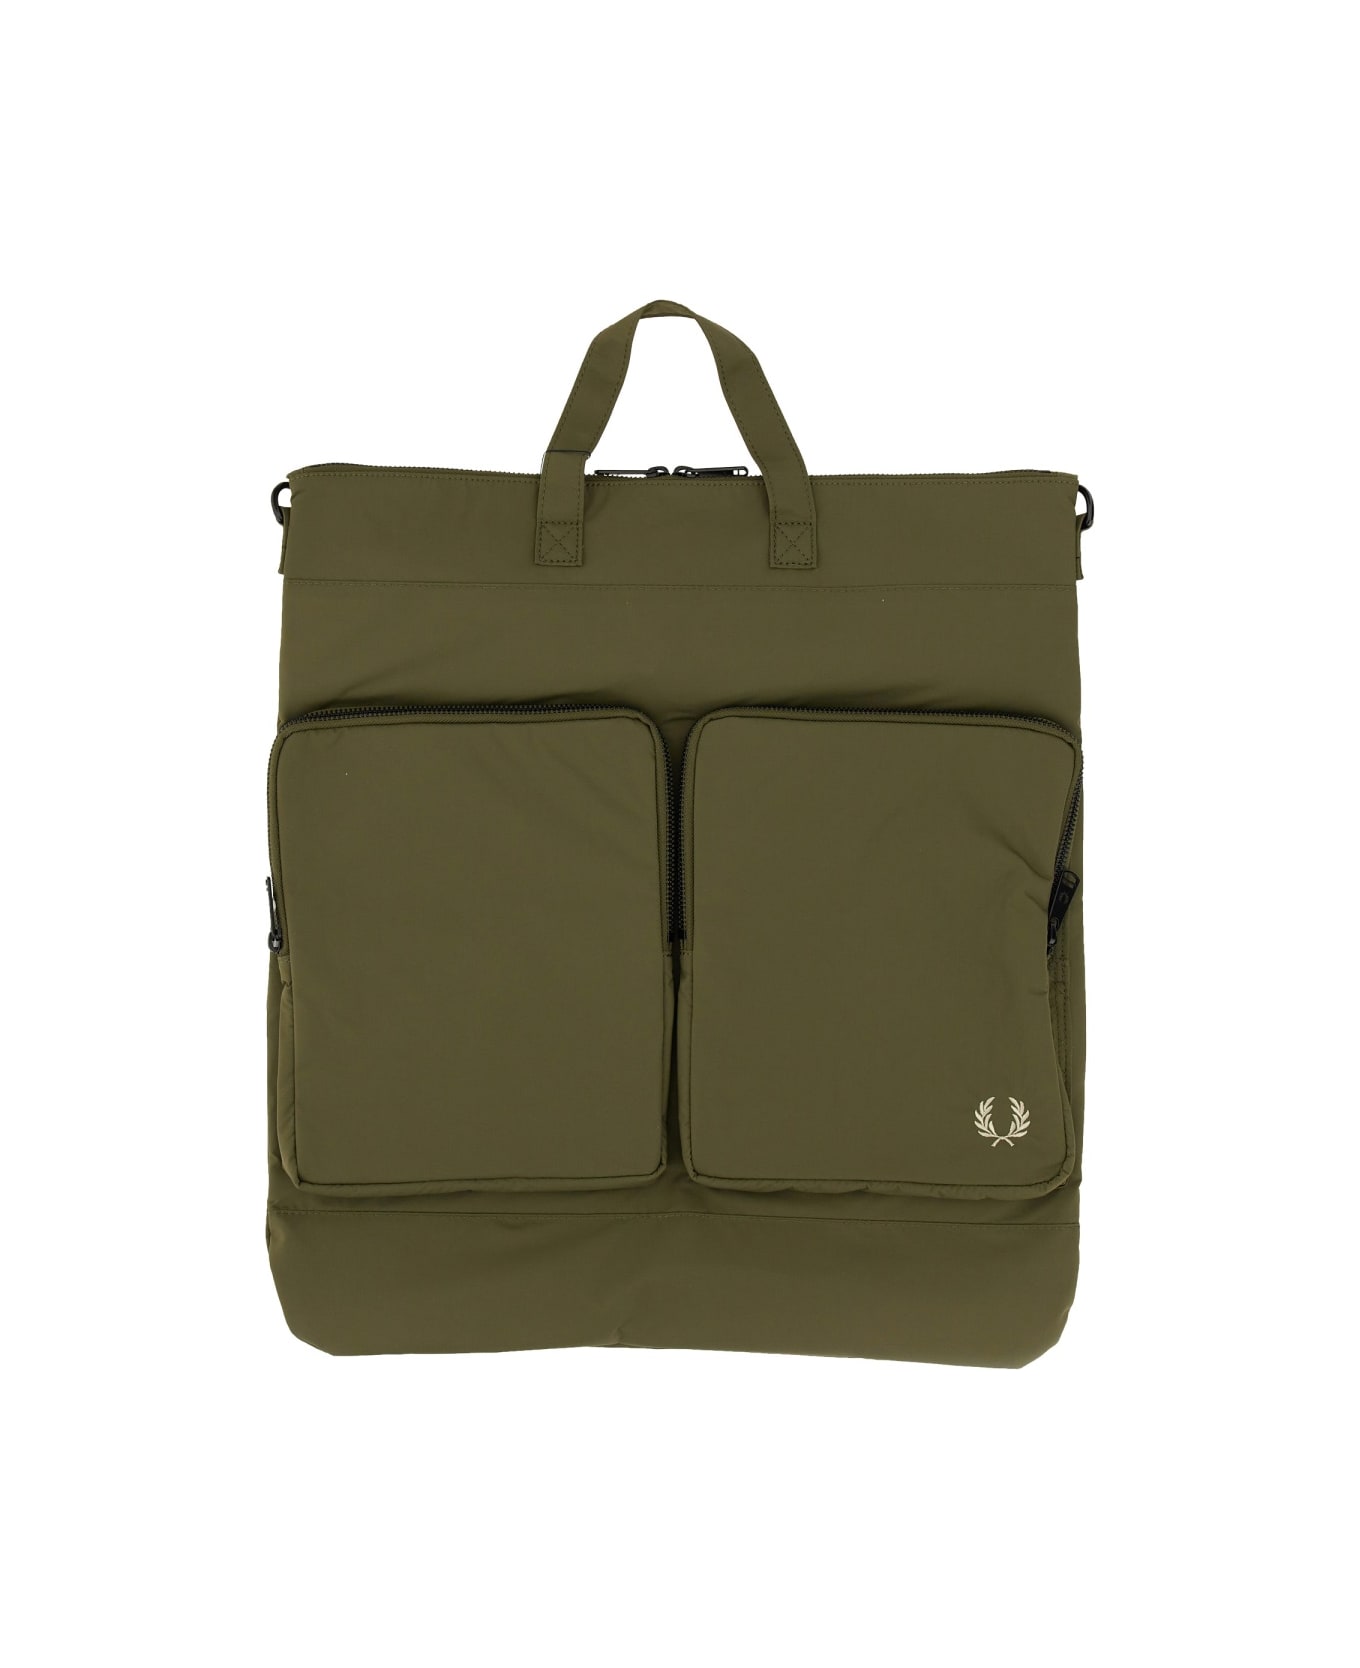 Fred Perry Bag "helmet" - MILITARY GREEN